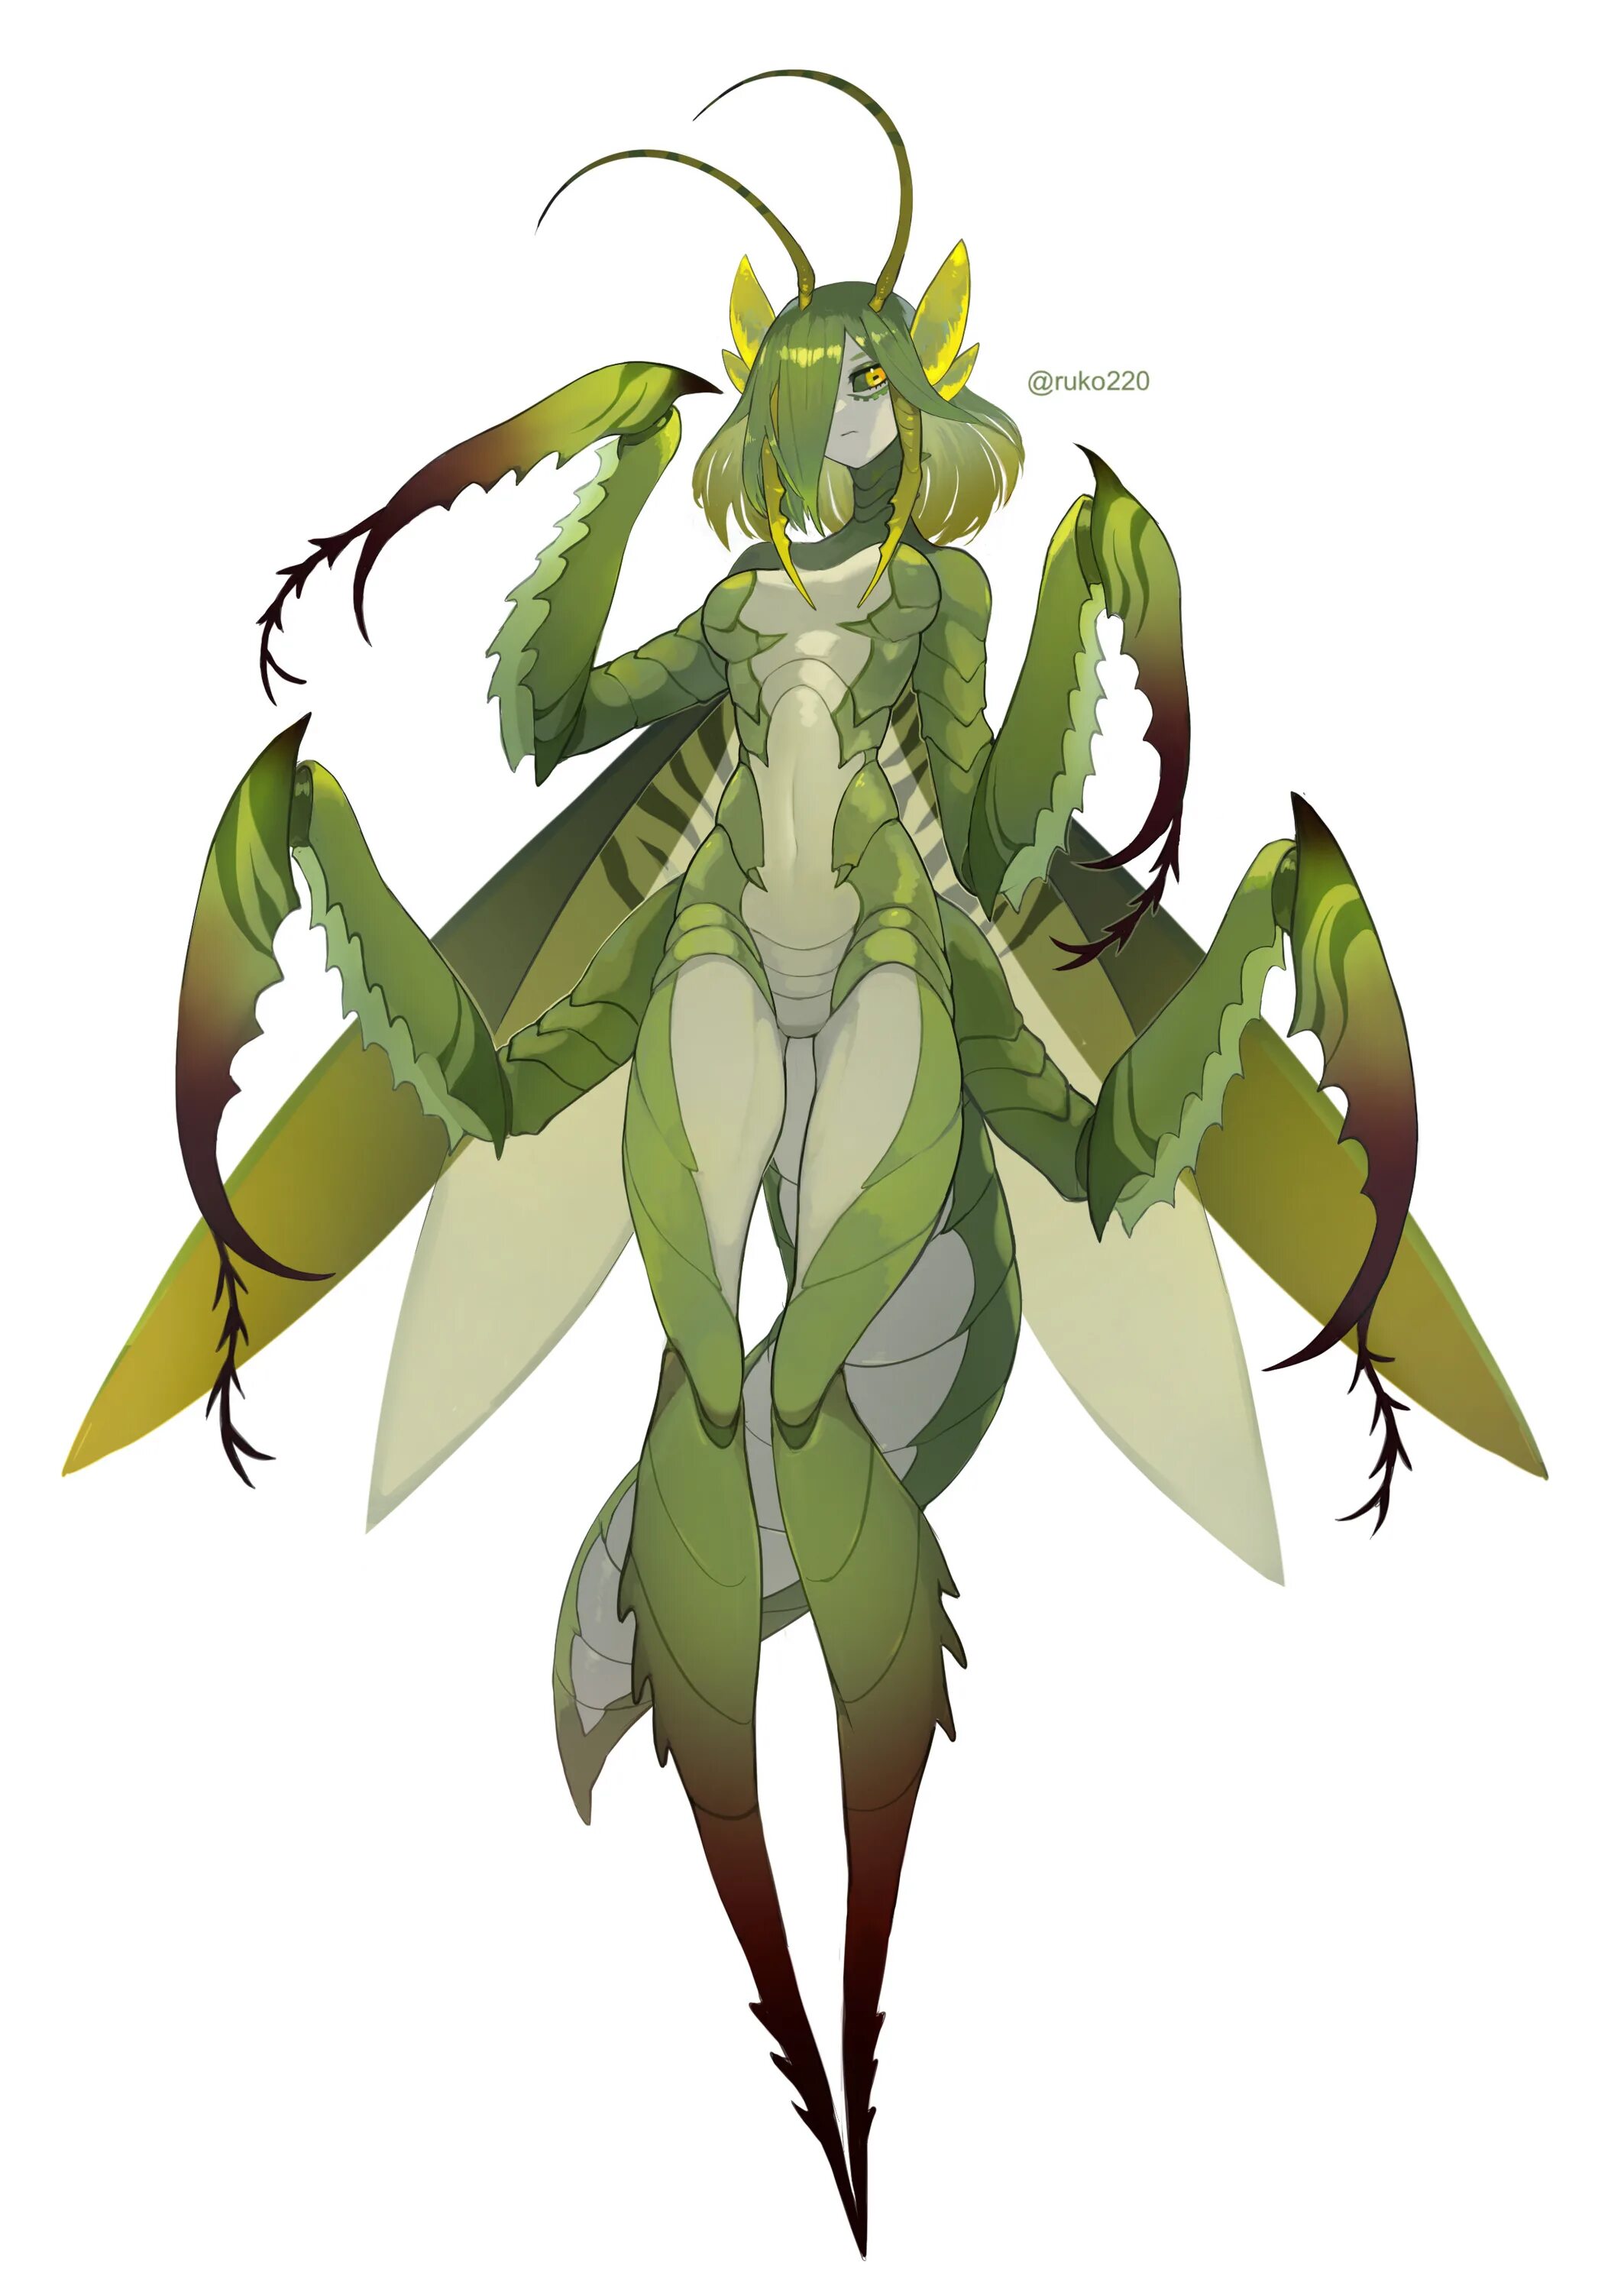 Plant girls insect invasion. Богомол Monster girl Insectoid. Мантис 18. Богомол Monster girl Insectoid гиантесс.